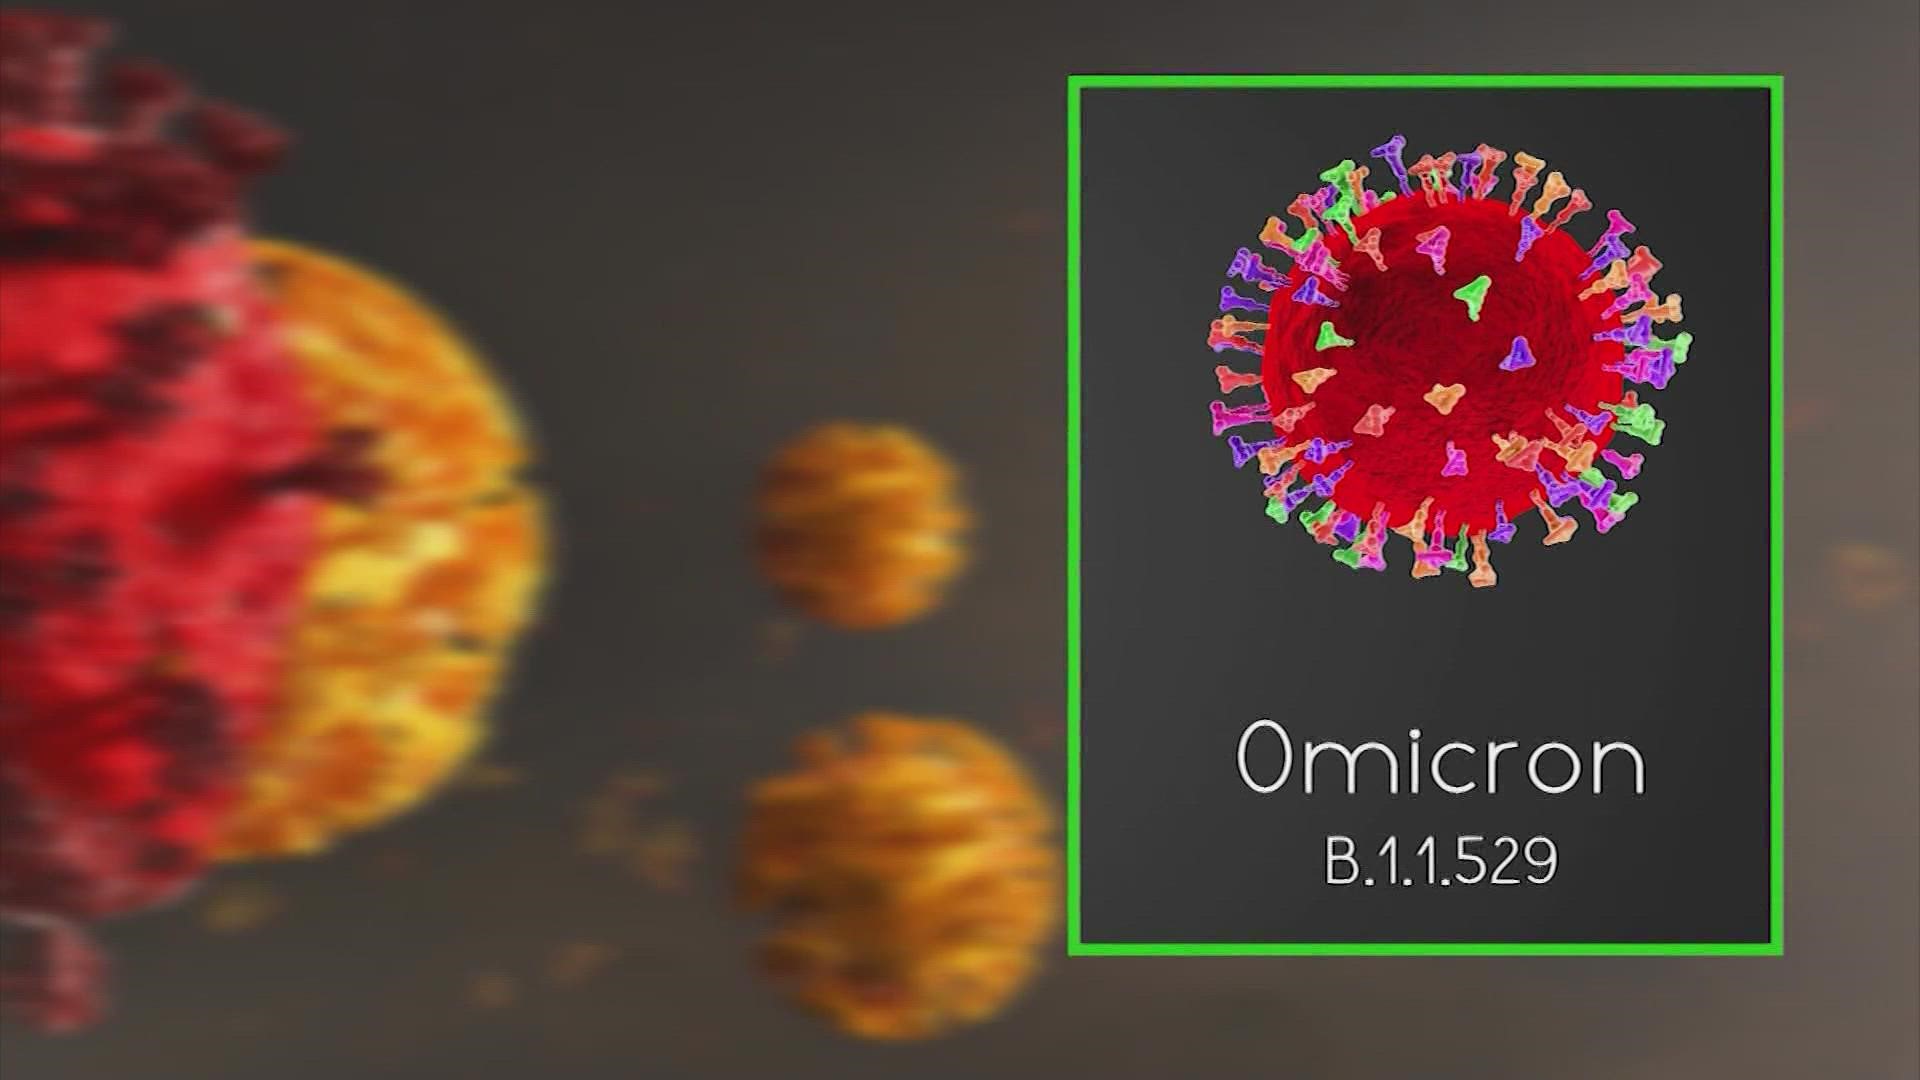 As the omicron variant sweeps Houston, is there a bright side? Does it mean more people will have immunity which could help put an end to the pandemic?